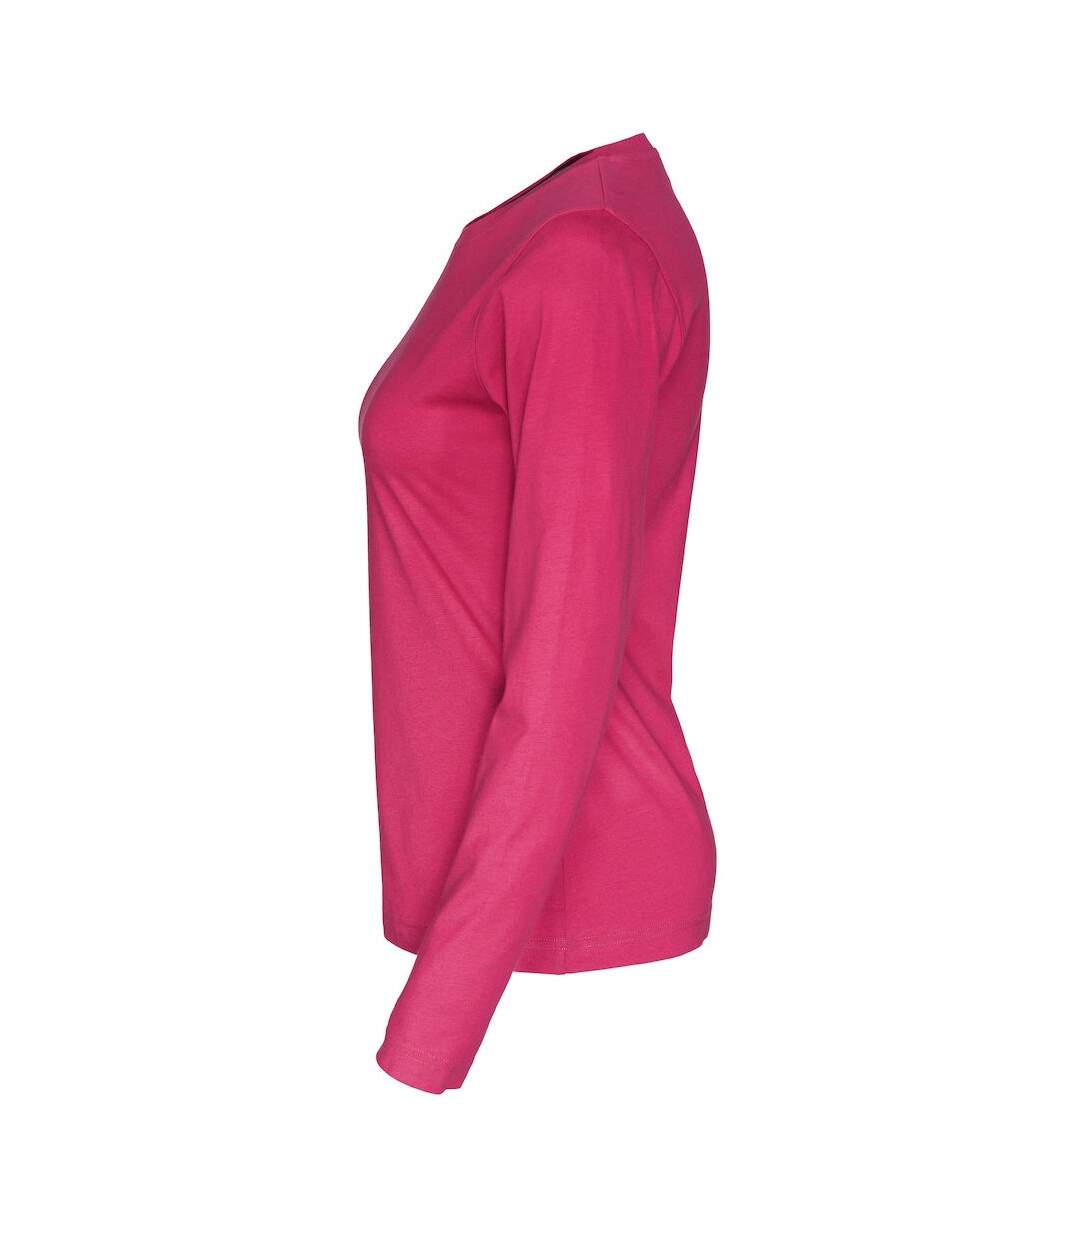 Cottover Womens/Ladies Long-Sleeved T-Shirt (Dark Cerise)